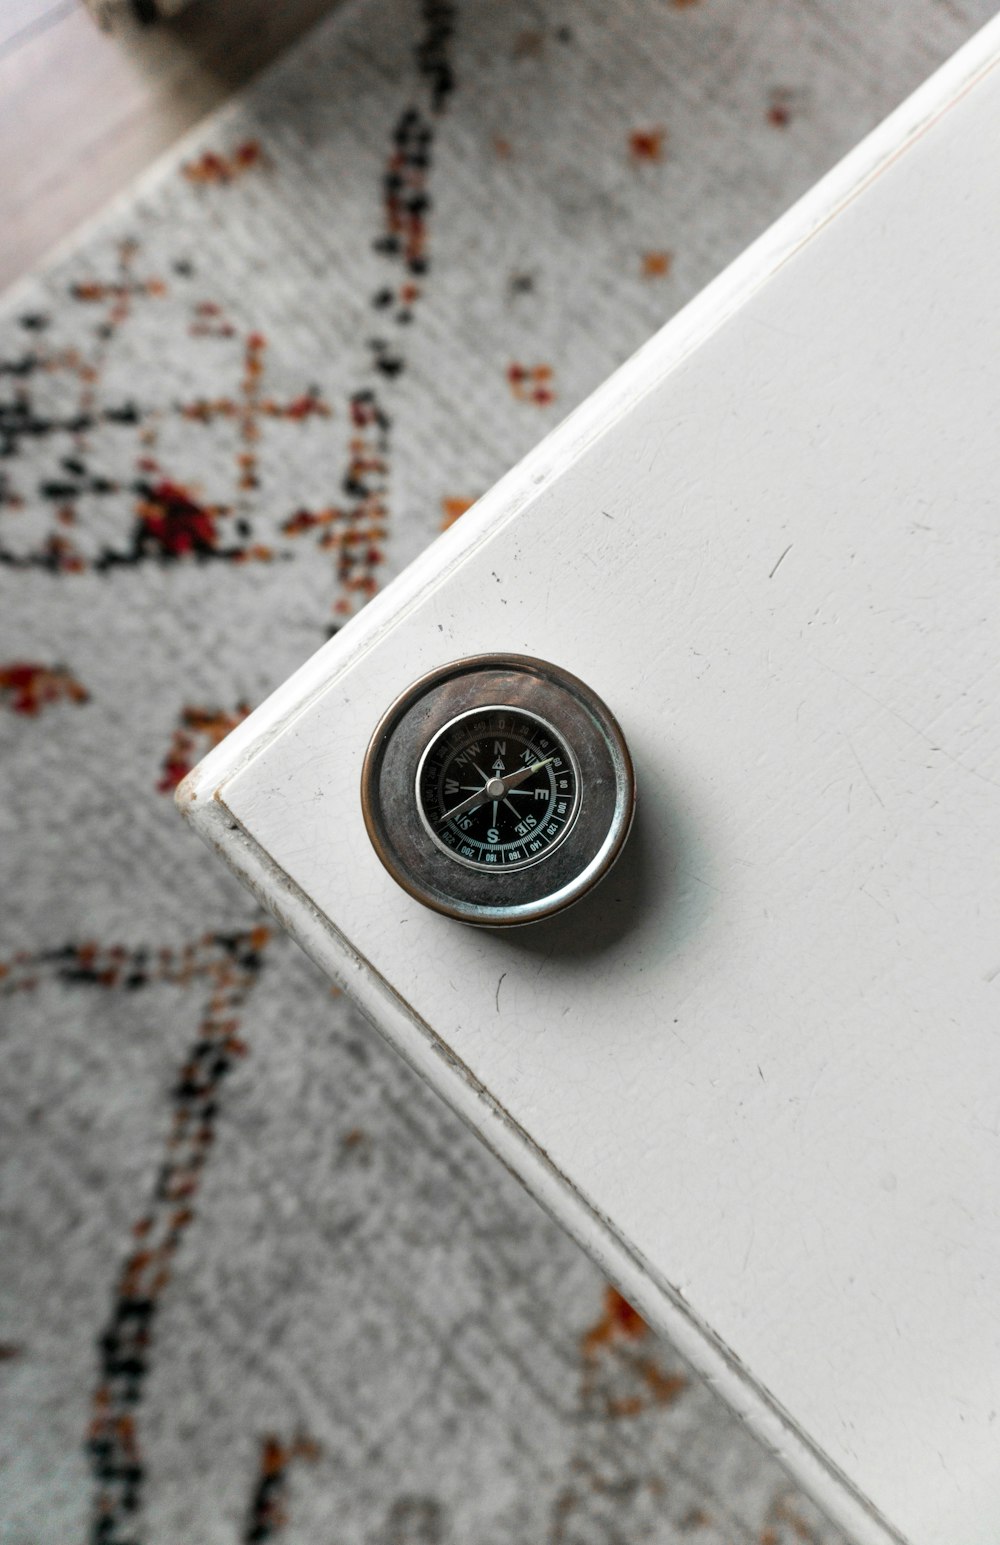 silver-colored compass on edge of white table